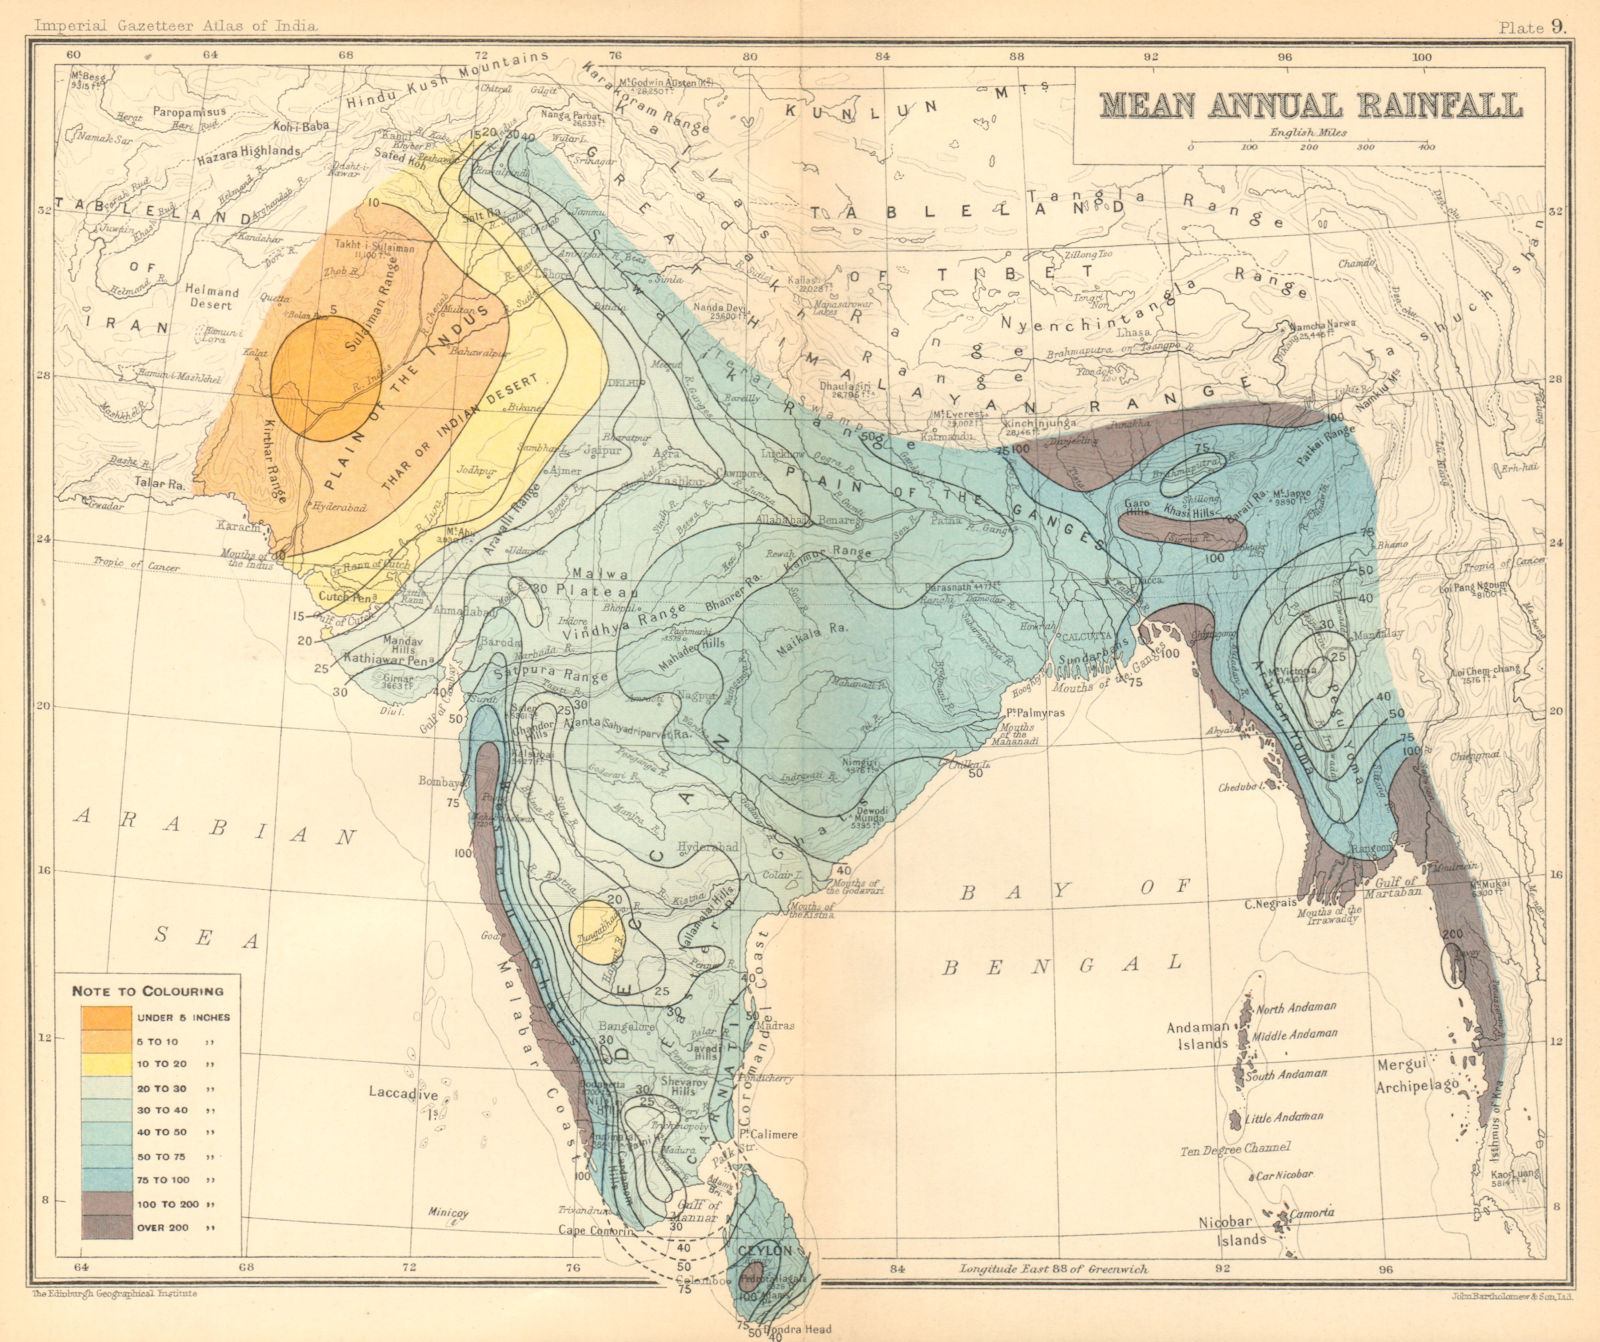 Associate Product SOUTH ASIA. British India & Burma. Mean Annual Rainfall 1931 old vintage map